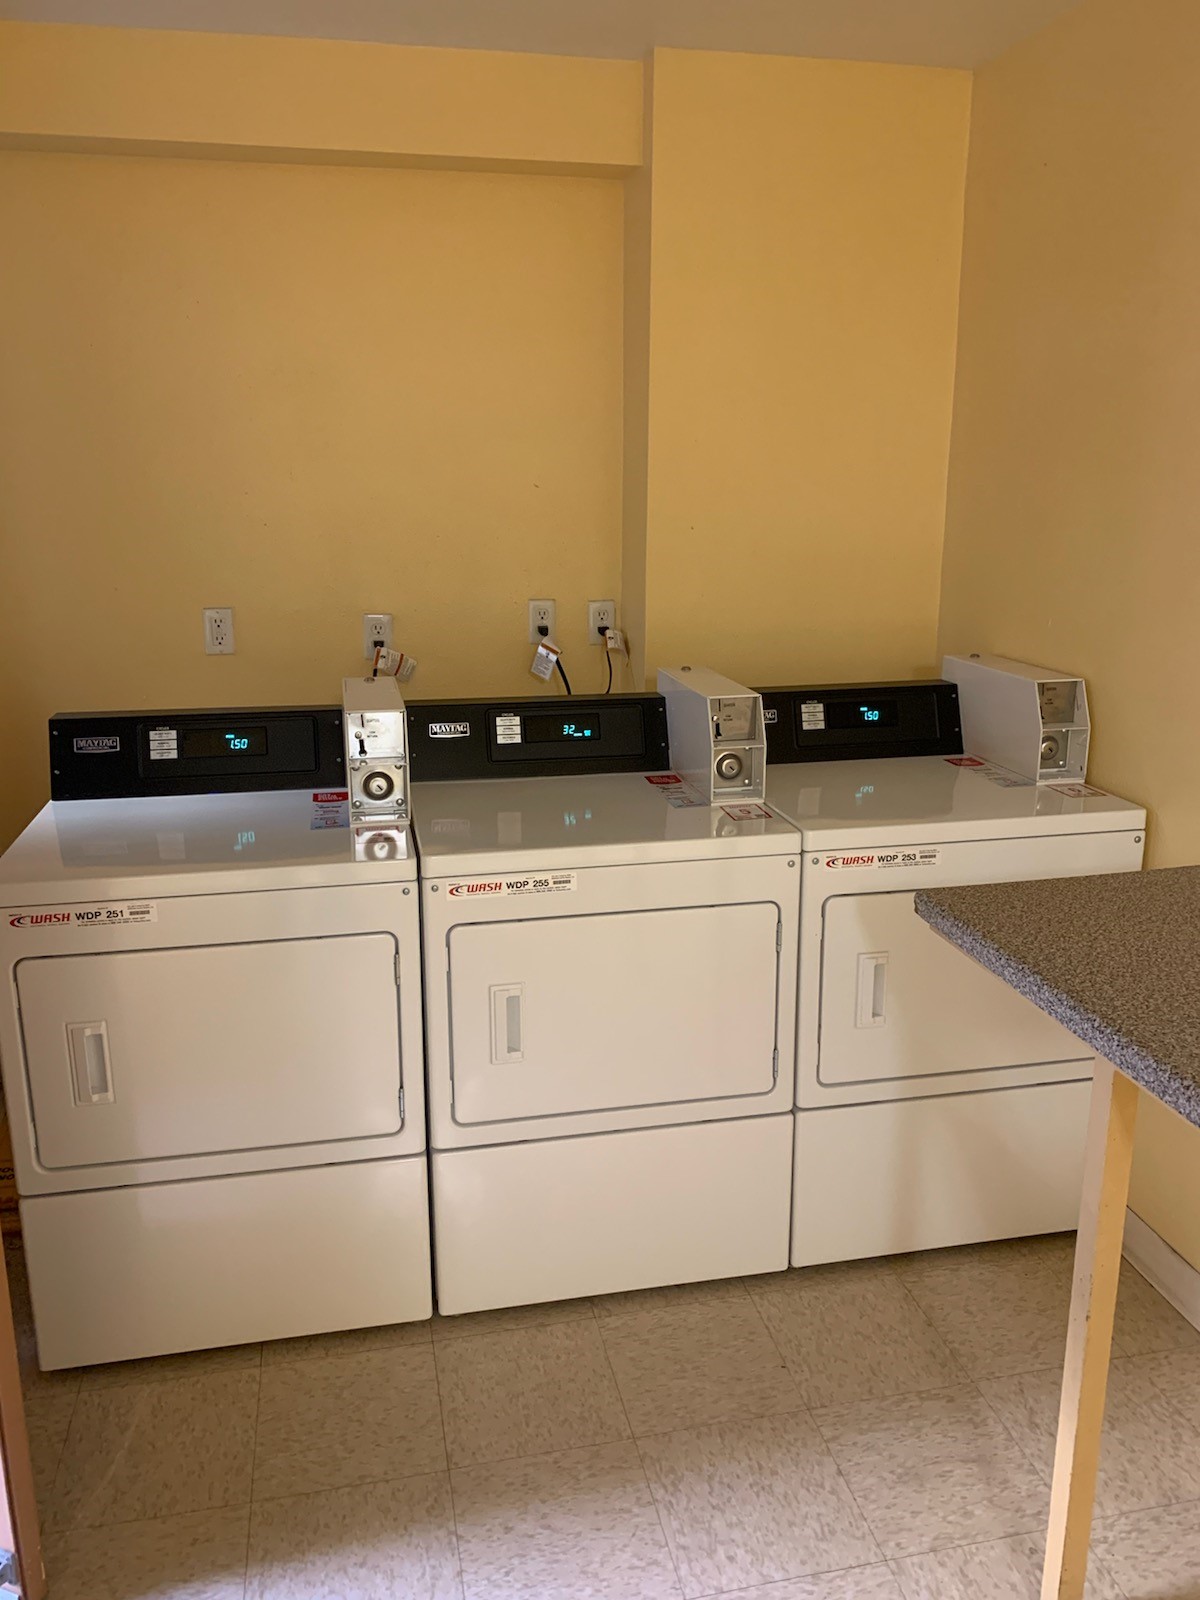 Laundry room with three machines shown and a folding table.